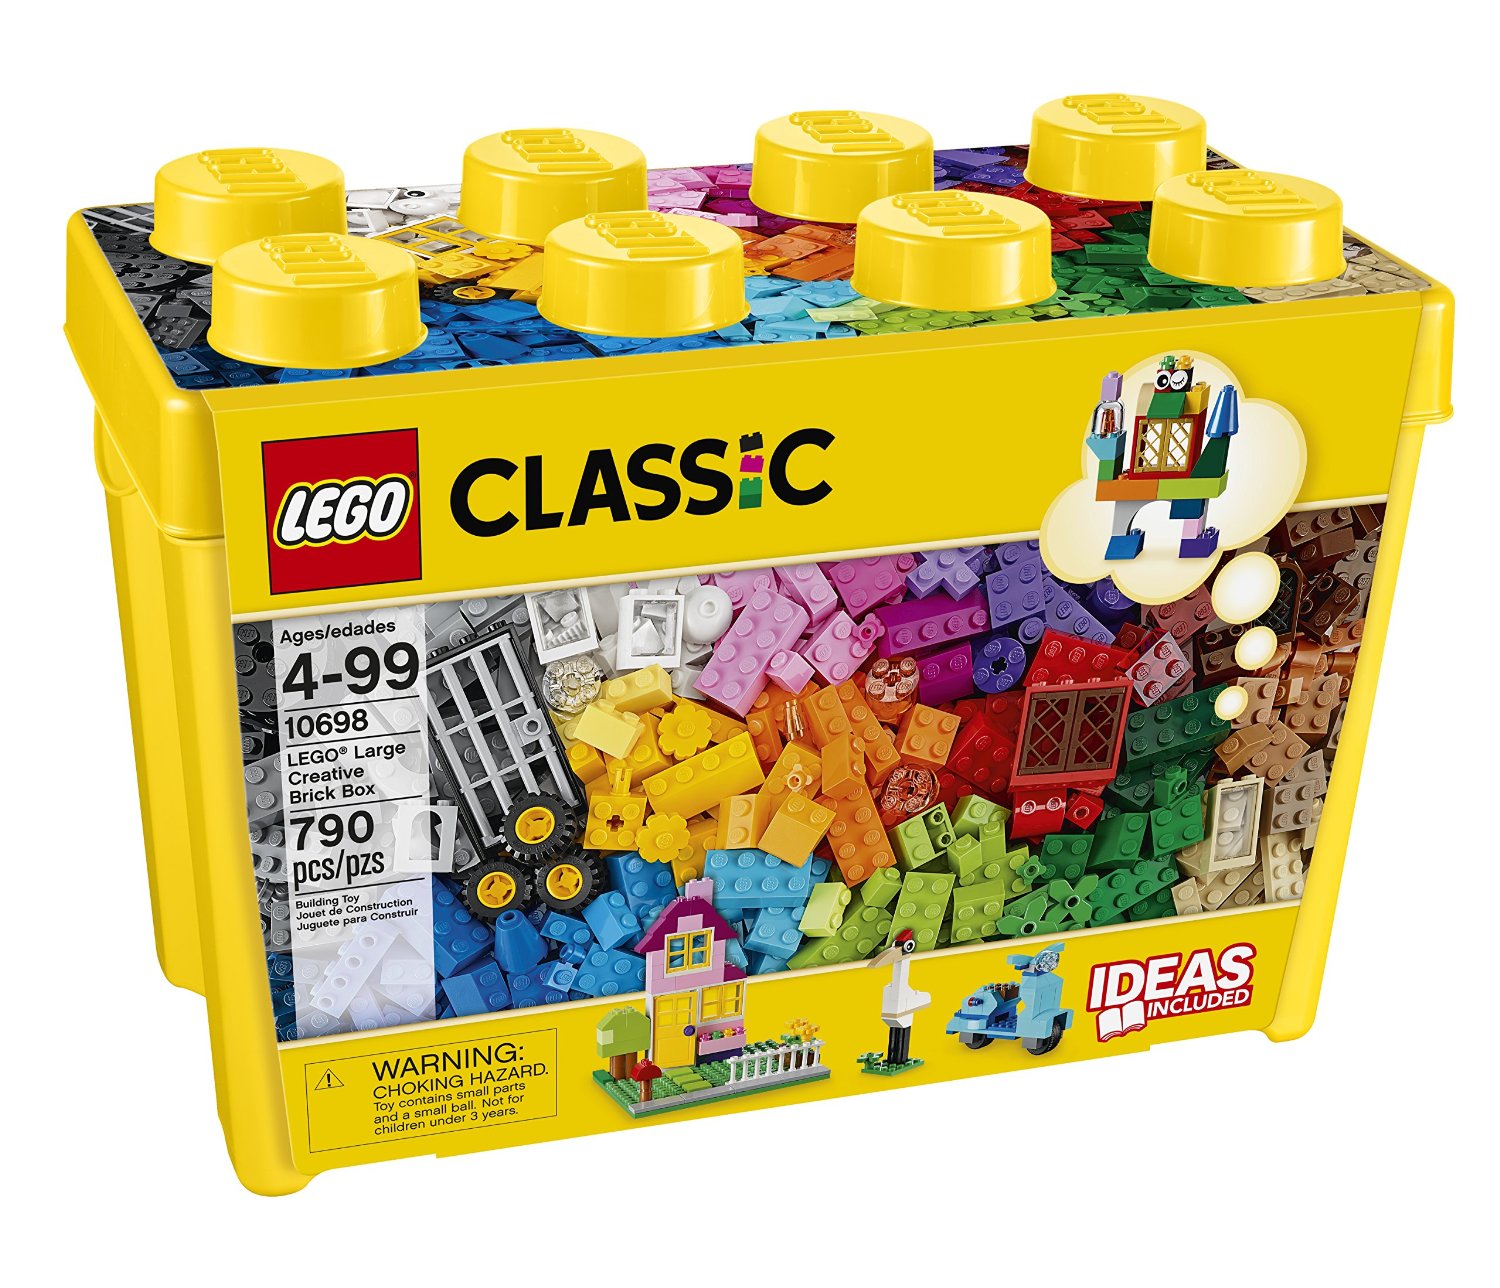 LEGO Hacks for Building a Collection and Encouraging Creative Building